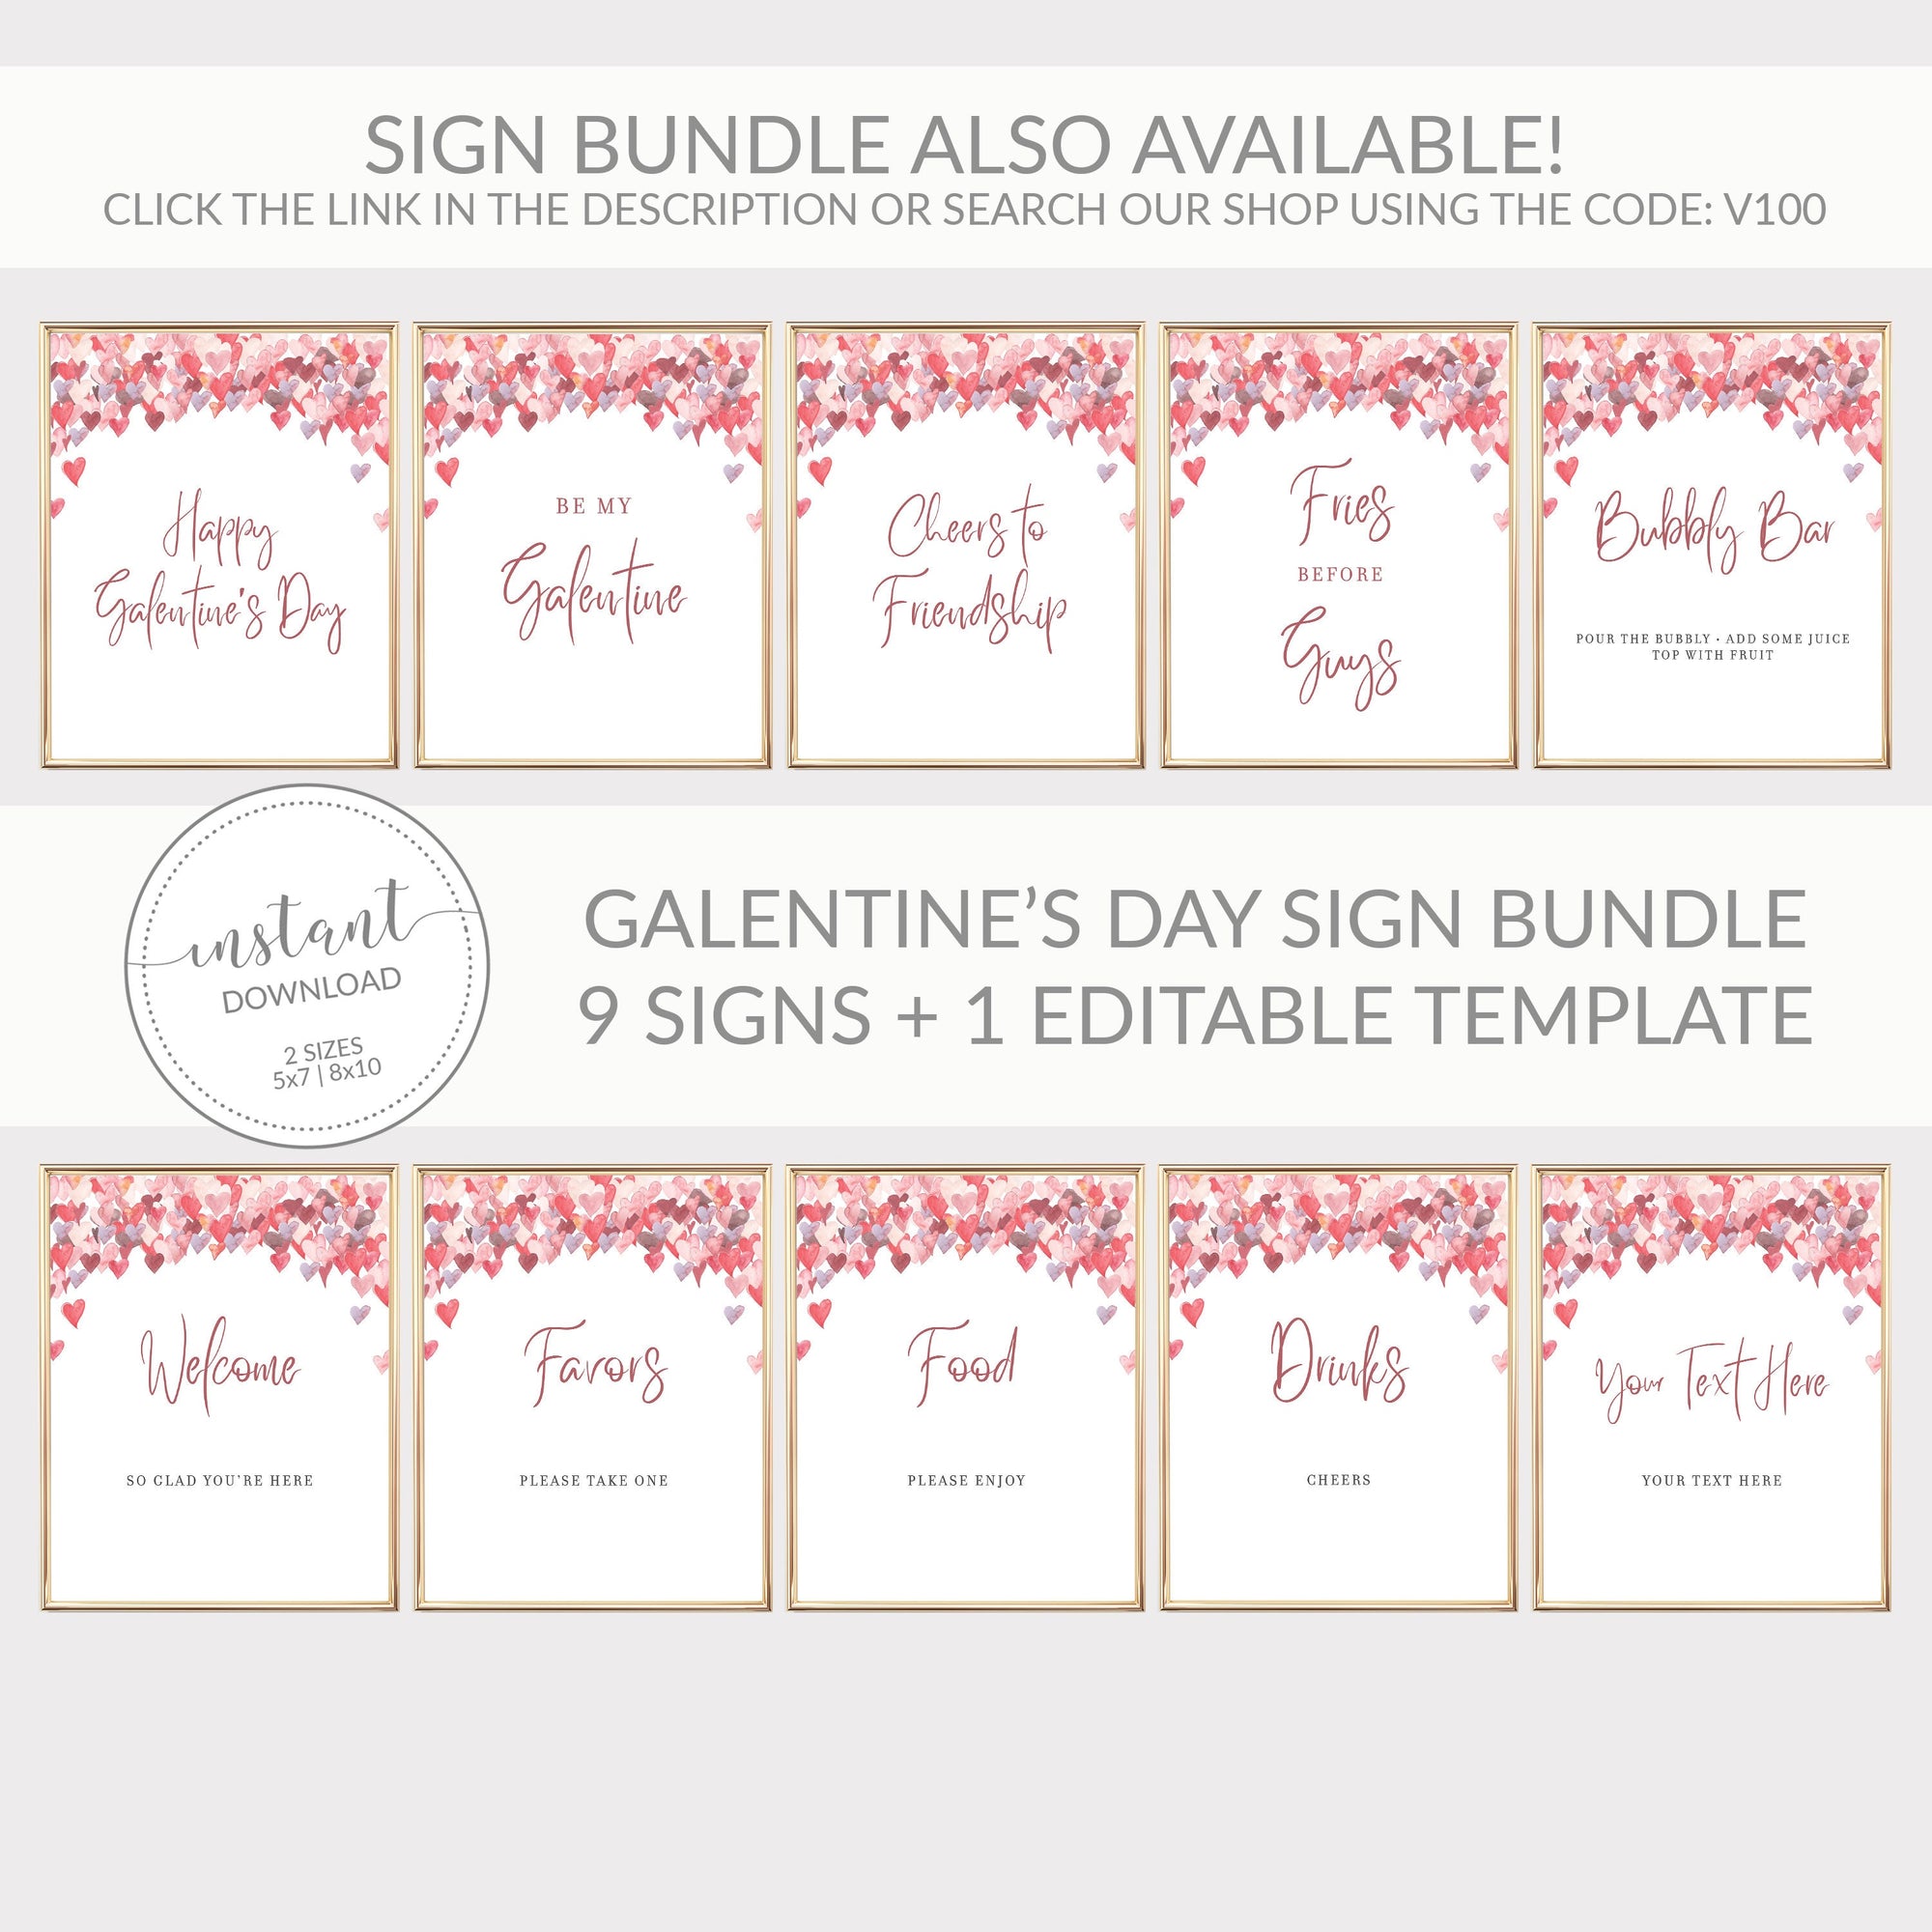 Welcome Sign Printable, Galentines Day Decor, Valentines Party Decorations, Valentine Wedding Table Sign, DIGITAL DOWNLOAD VH100